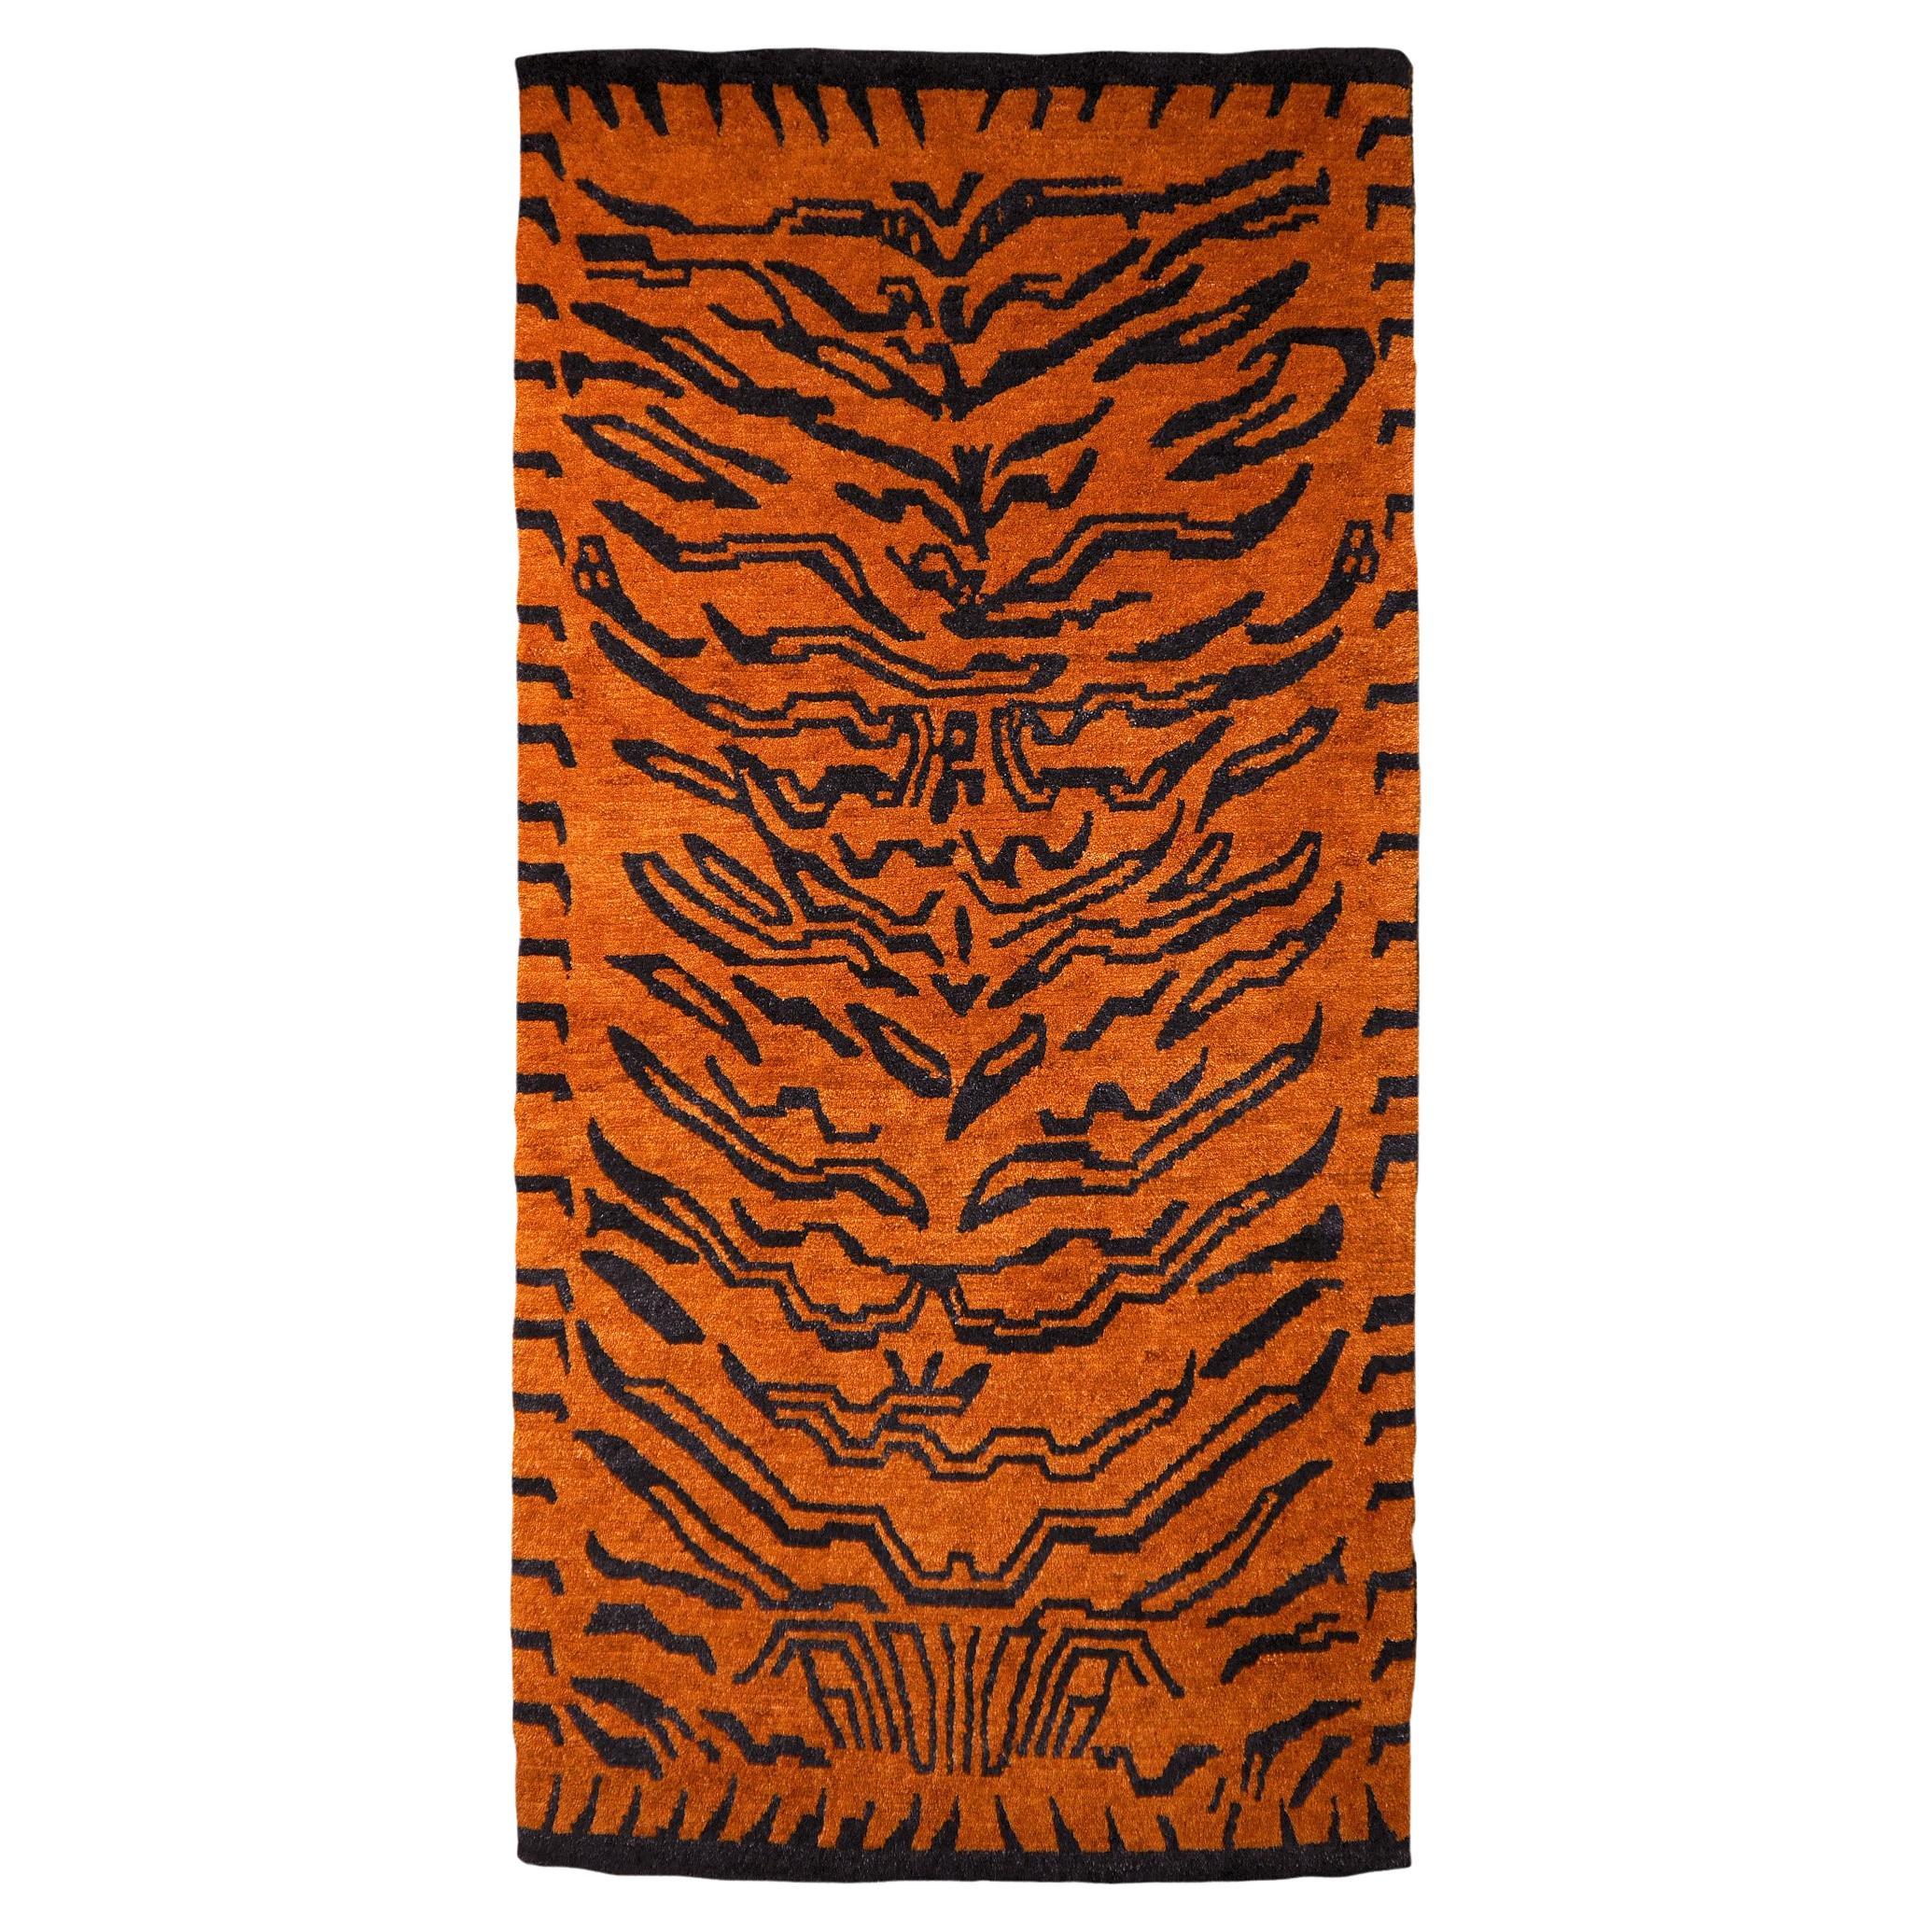 Tibetan Tiger Rug Pure Wool Hand Knotted Amber Charcoal by Djoharian Collection